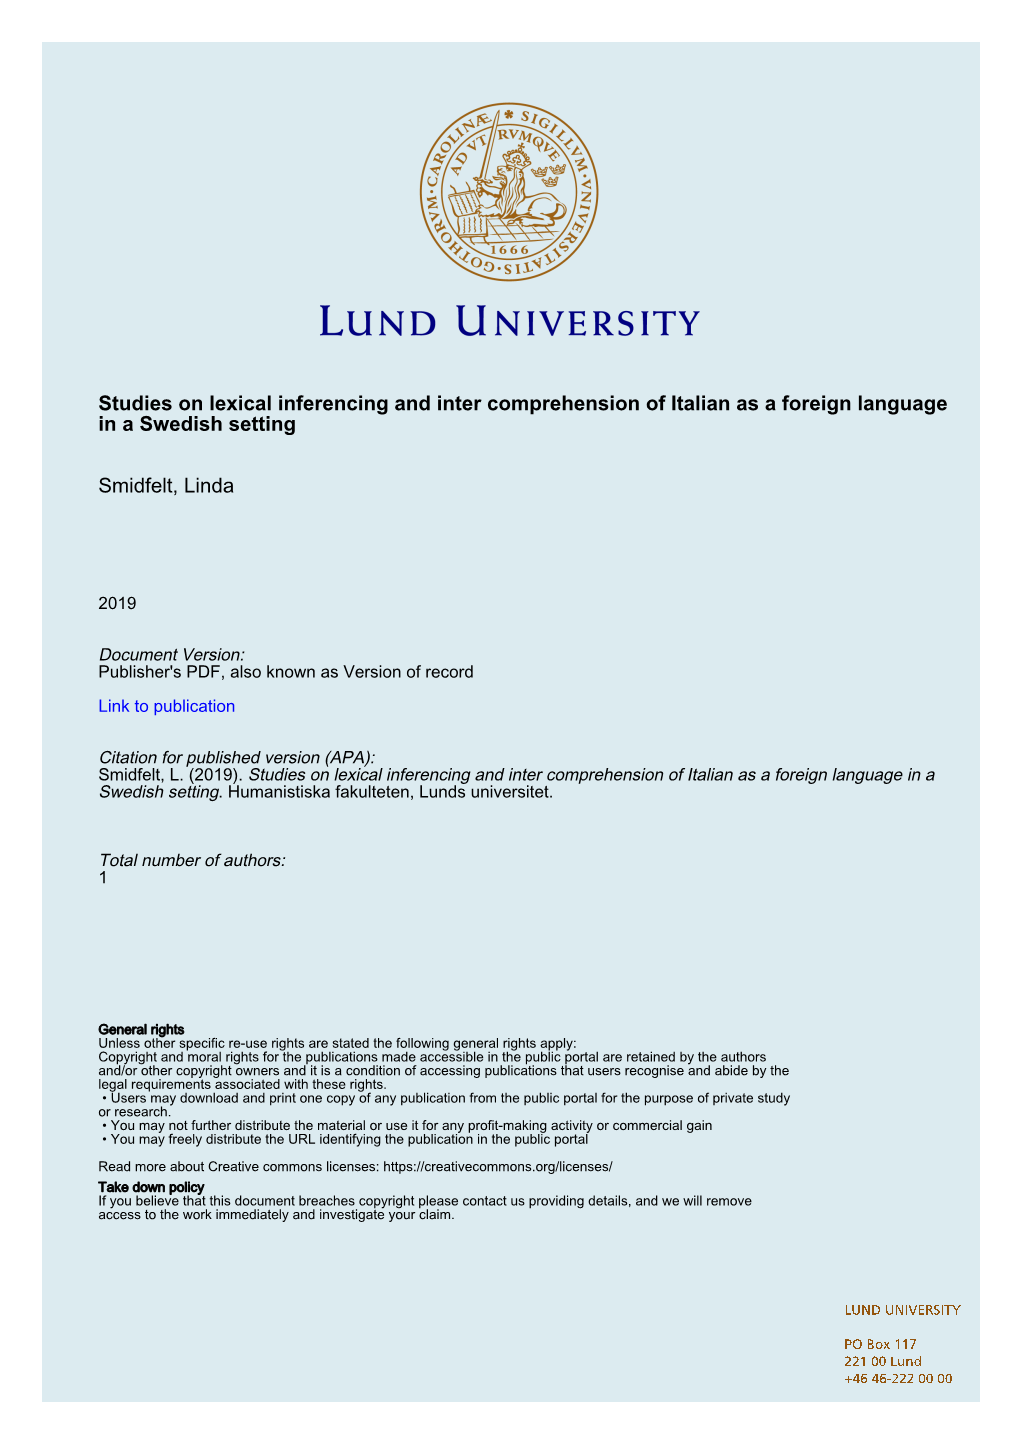 Studies on Lexical Inferencing and Inter Comprehension of Italian As a Foreign Language in a Swedish Setting